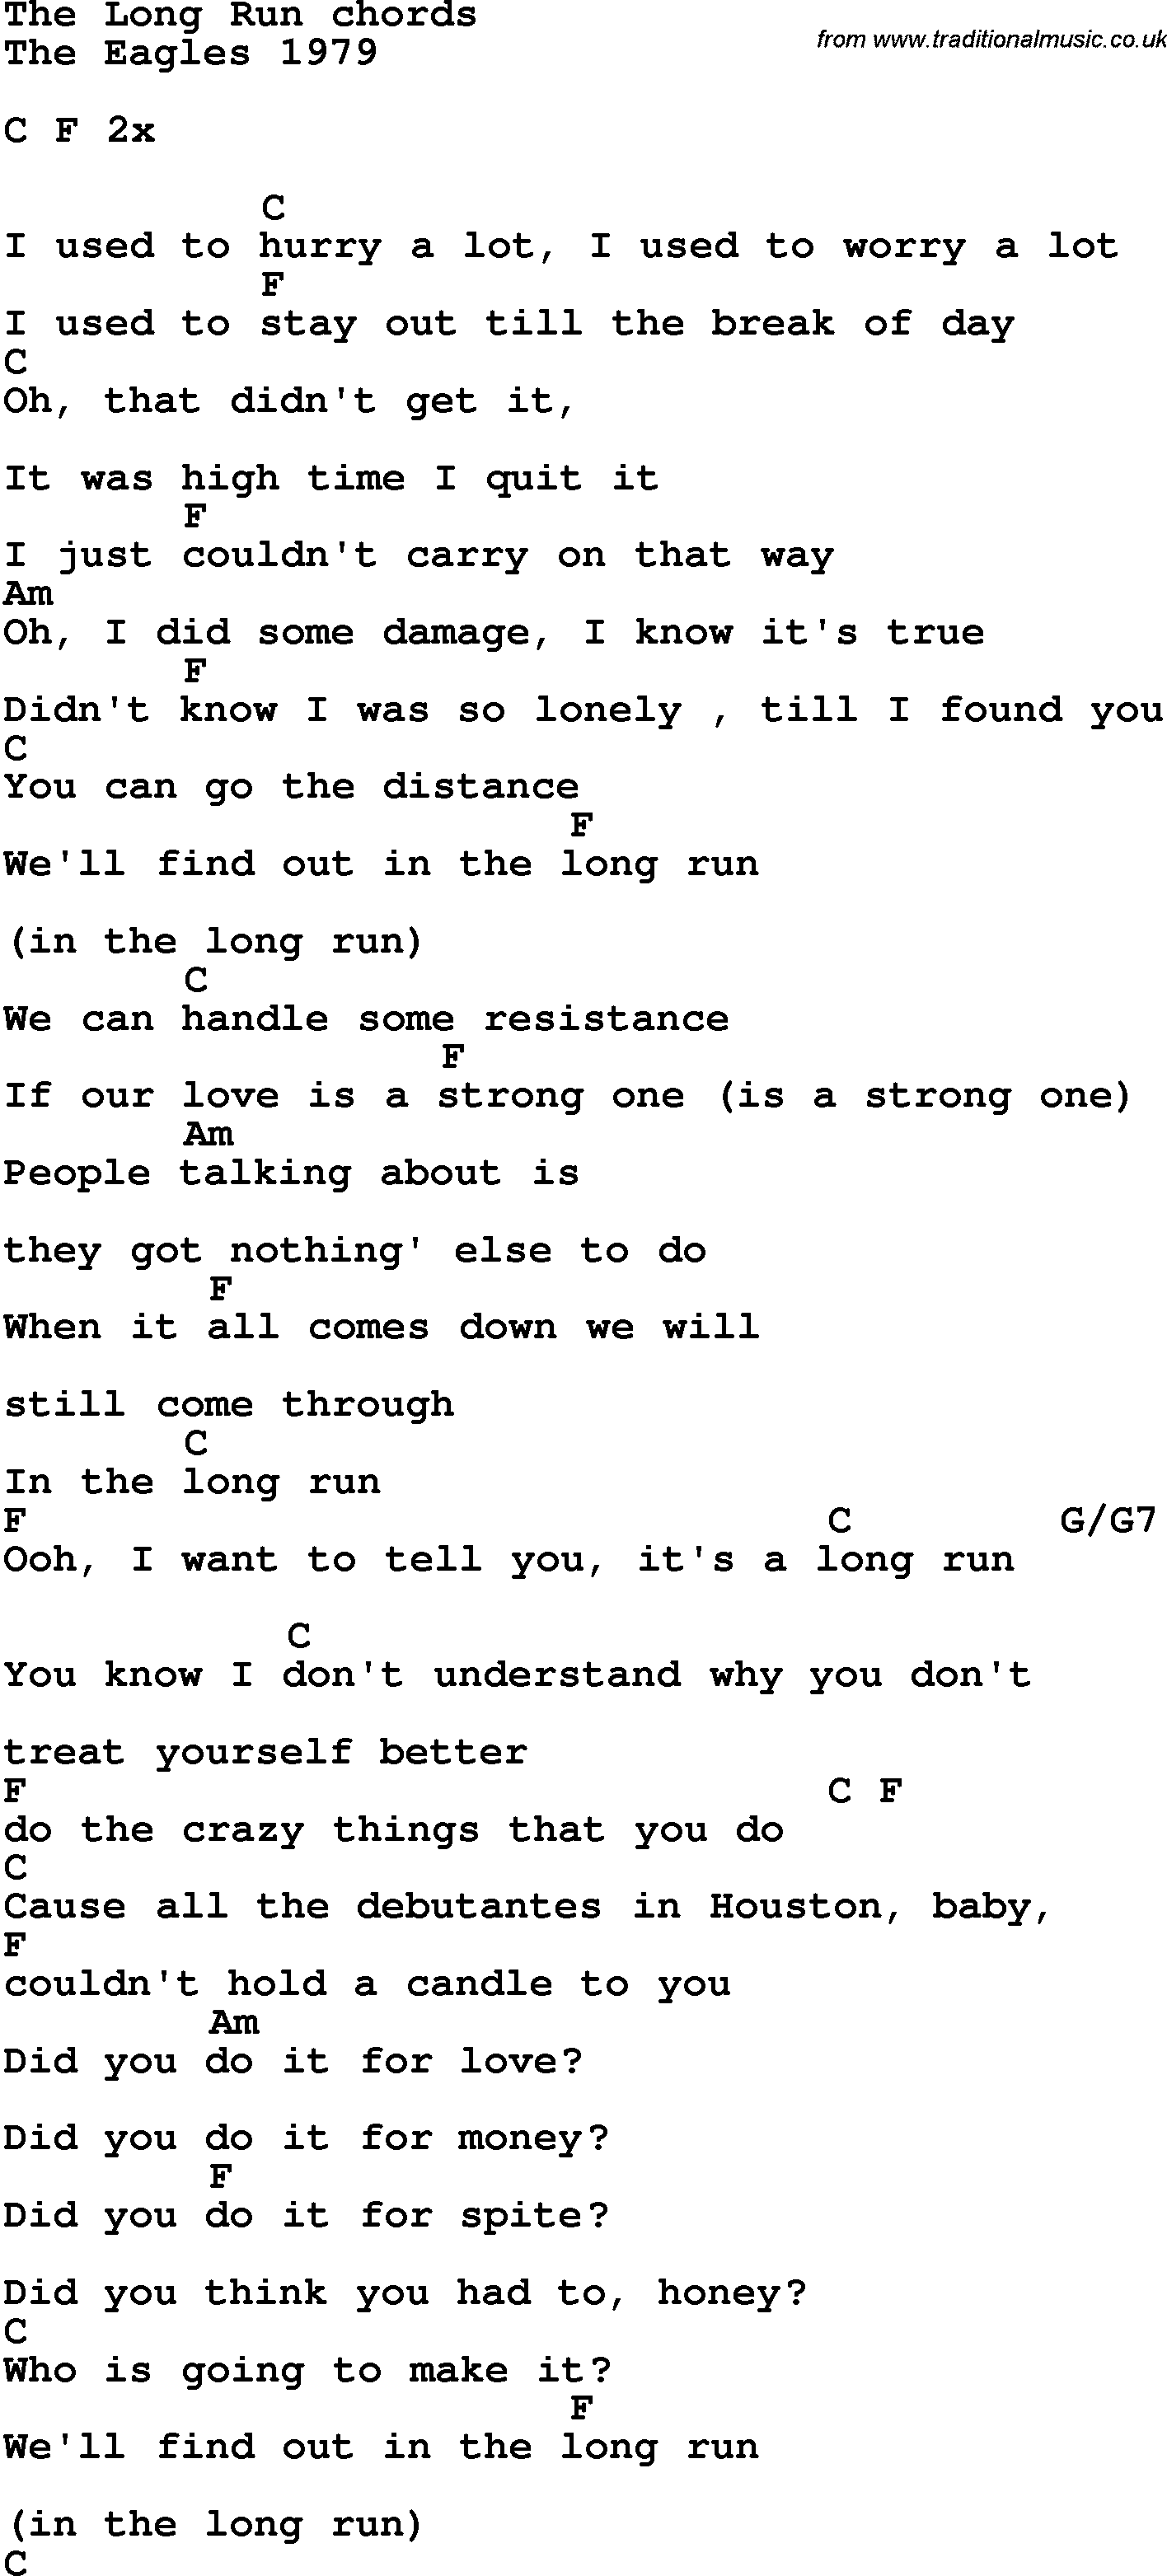 Song Lyrics with guitar chords for The Long Run - The Eagles 1979